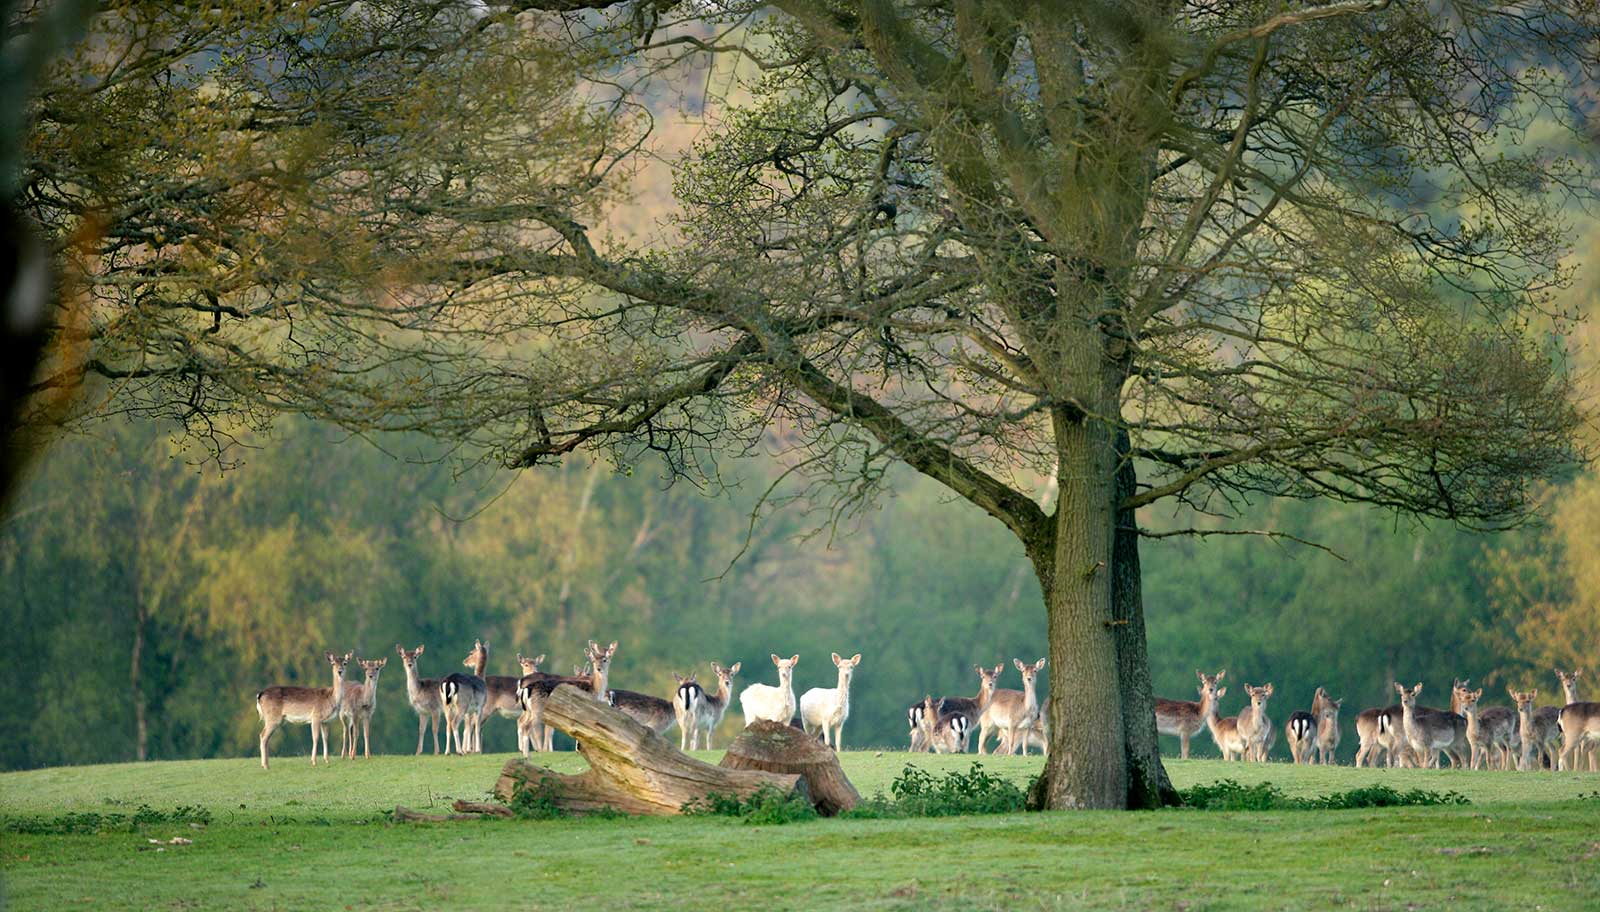 A photo of the New Forest by Paul Close